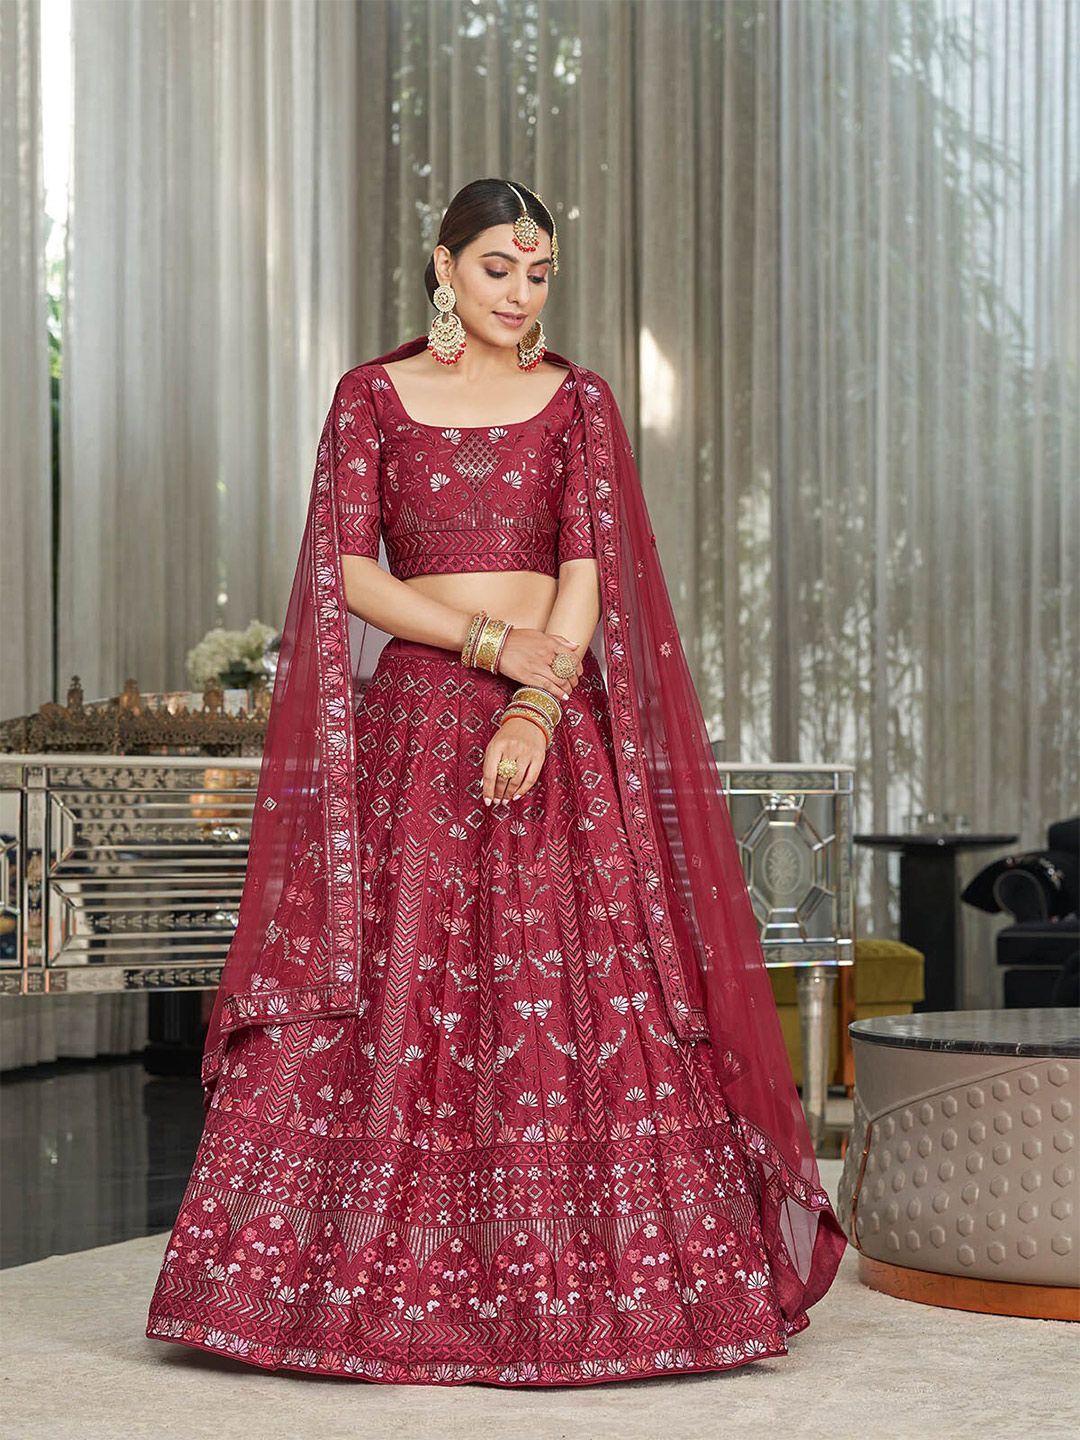 ODETTE Maroon Embellished Semi-Stitched Lehenga & Unstitched Blouse With Dupatta Price in India